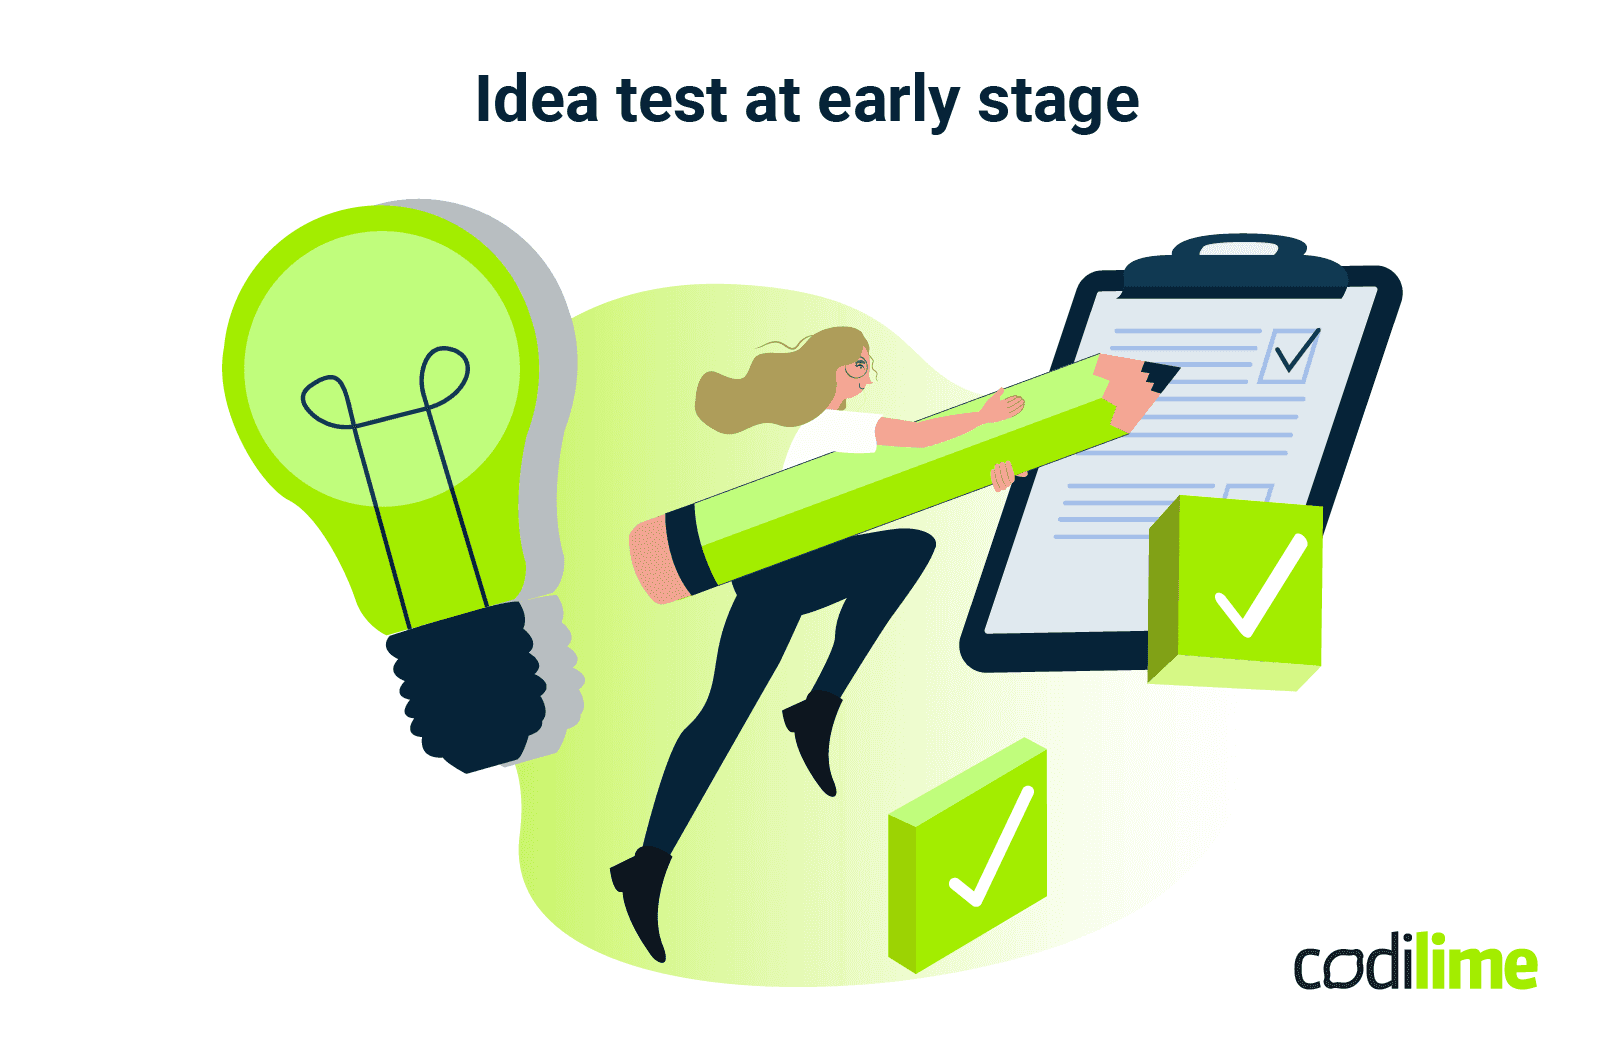 UX prototype benefits - Idea test at early stage